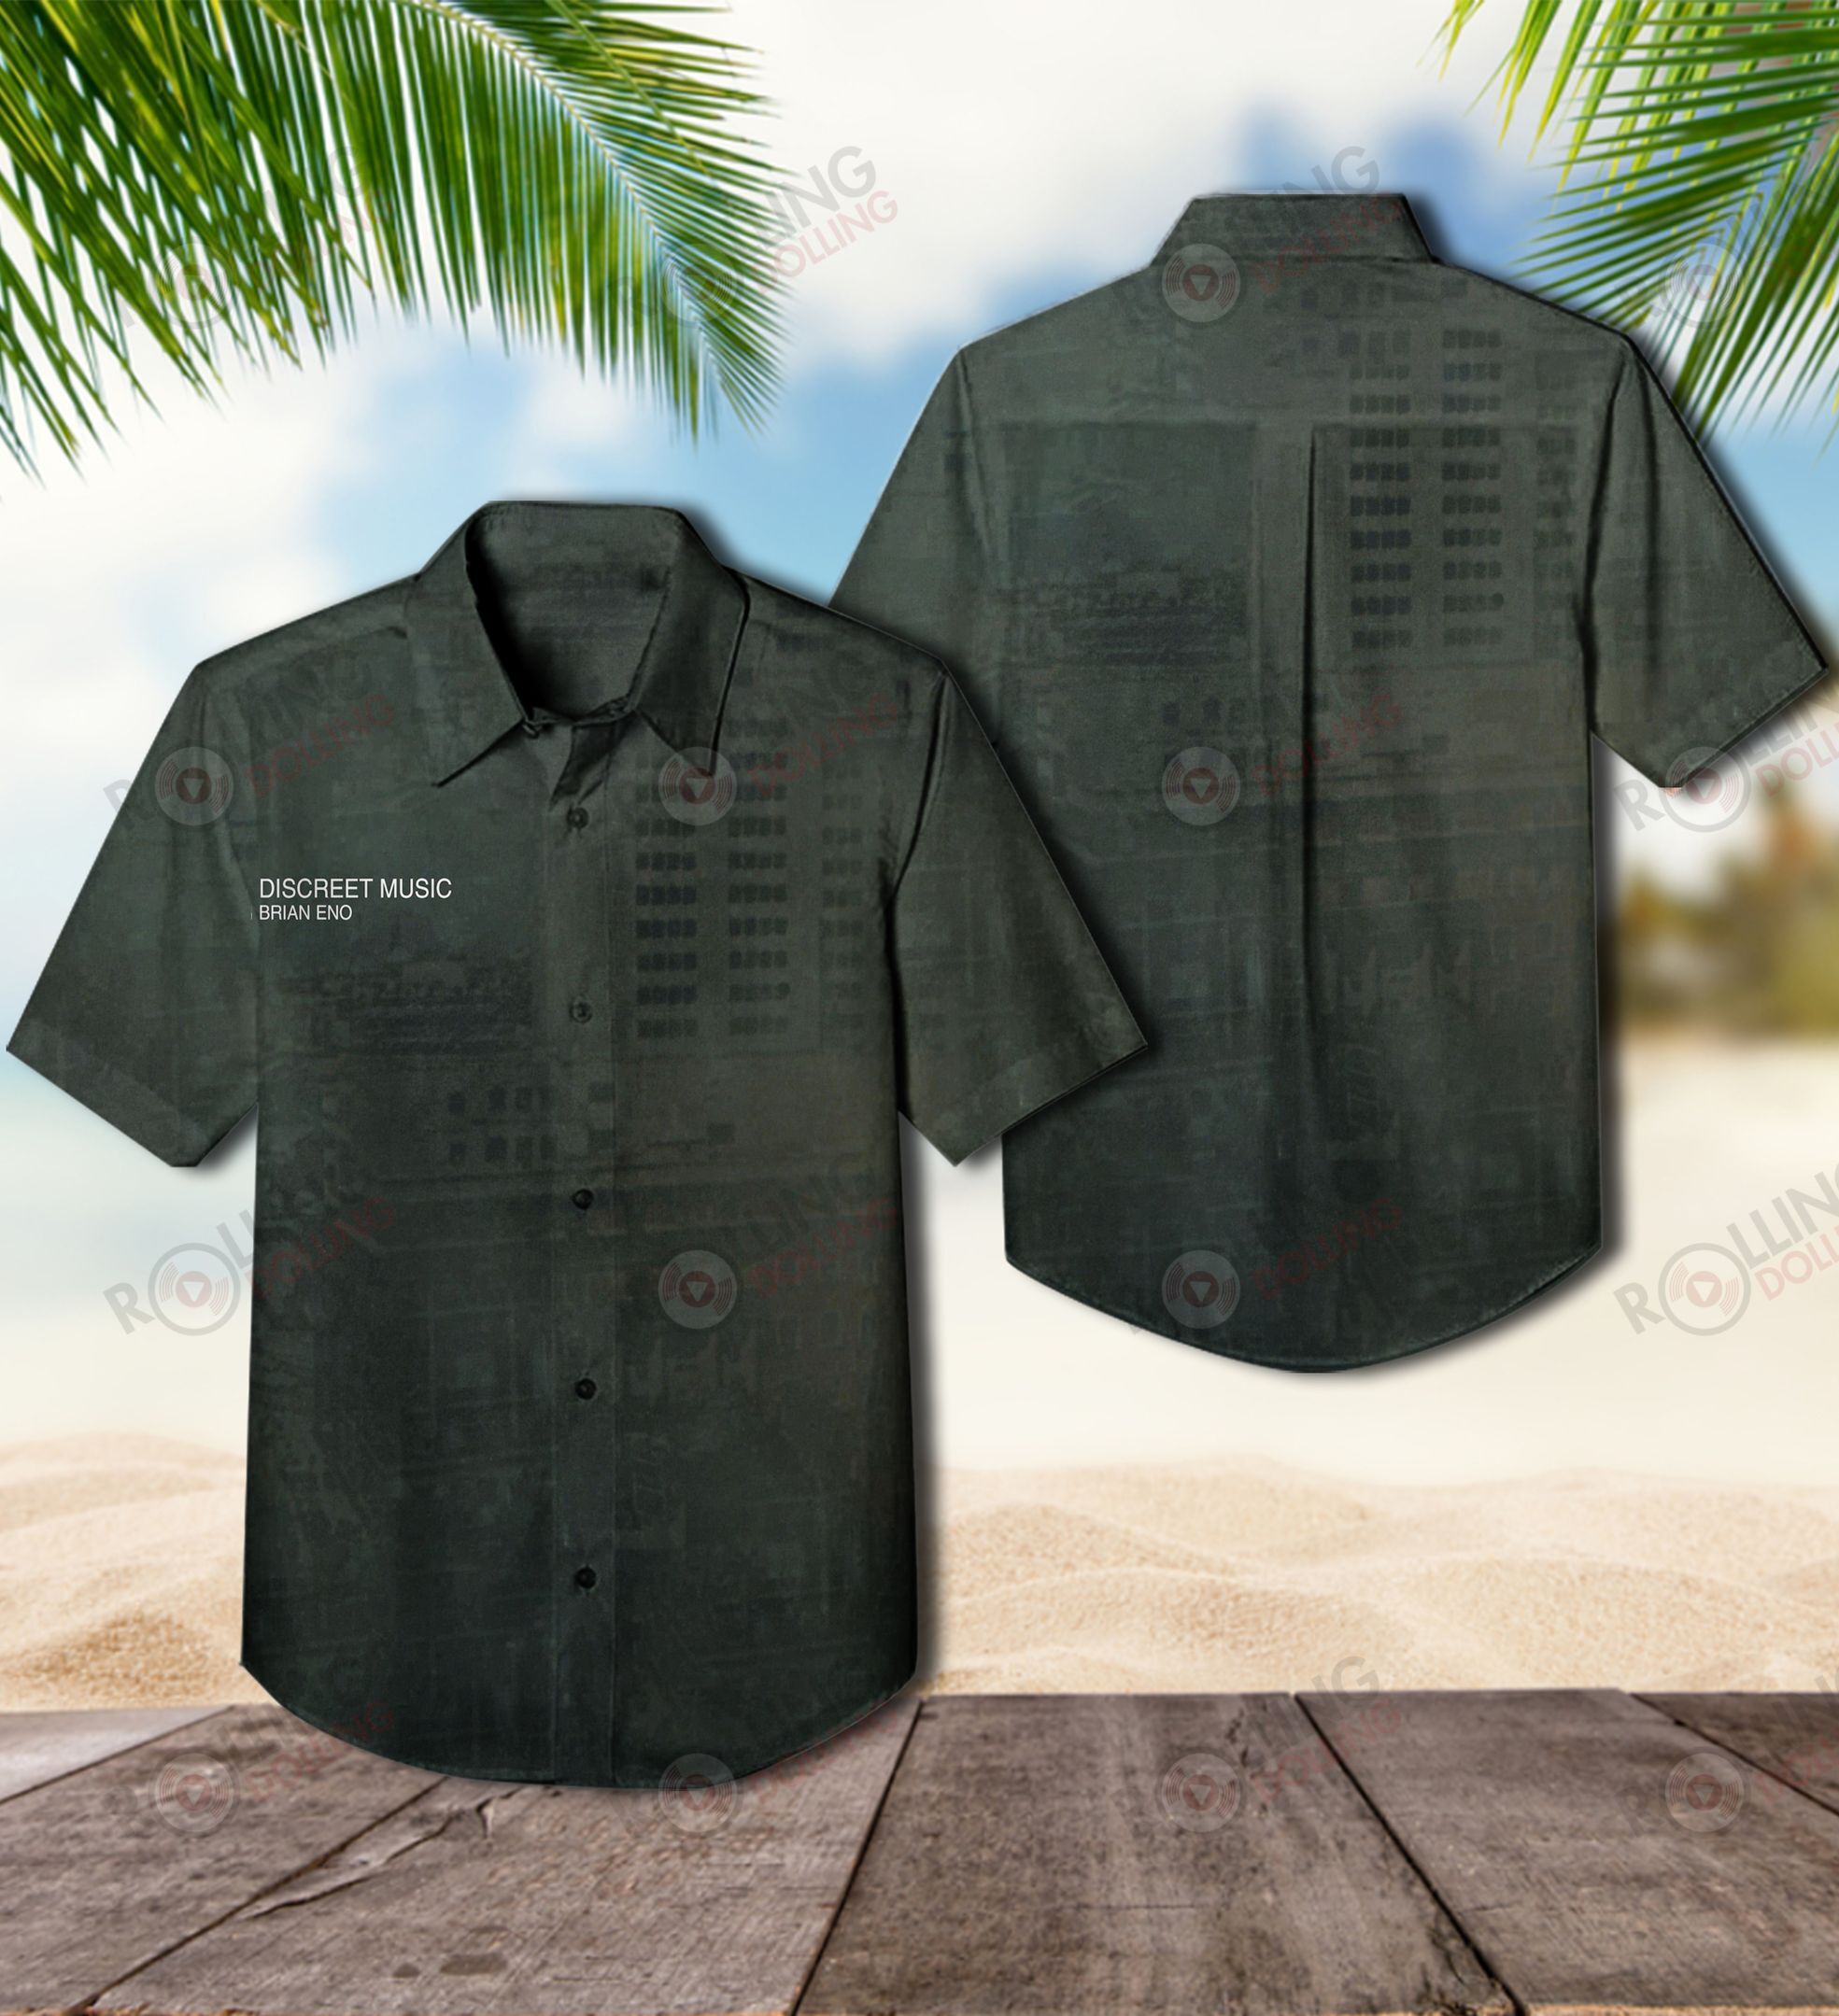 We have compiled a list of some of the best Hawaiian shirt that are available 339